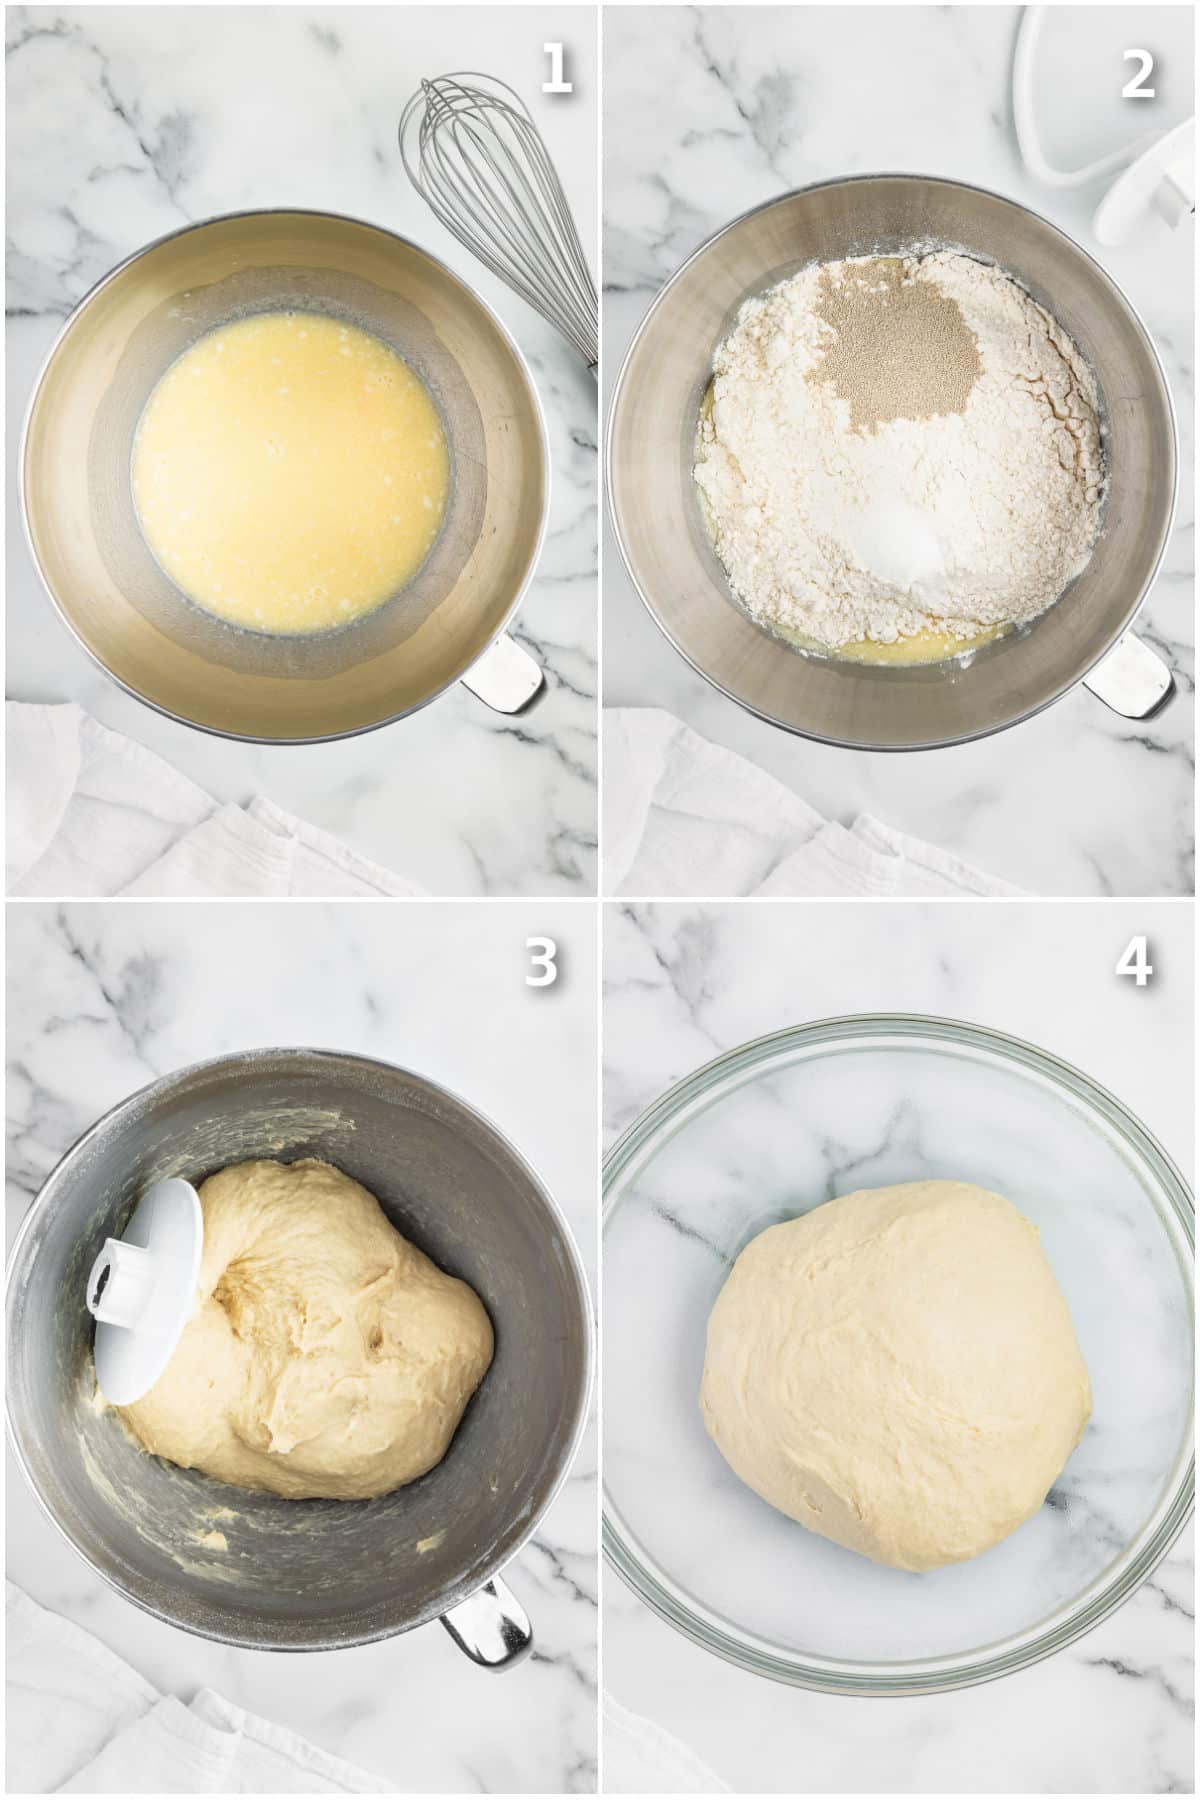 Process shots showing how to make bread dough.